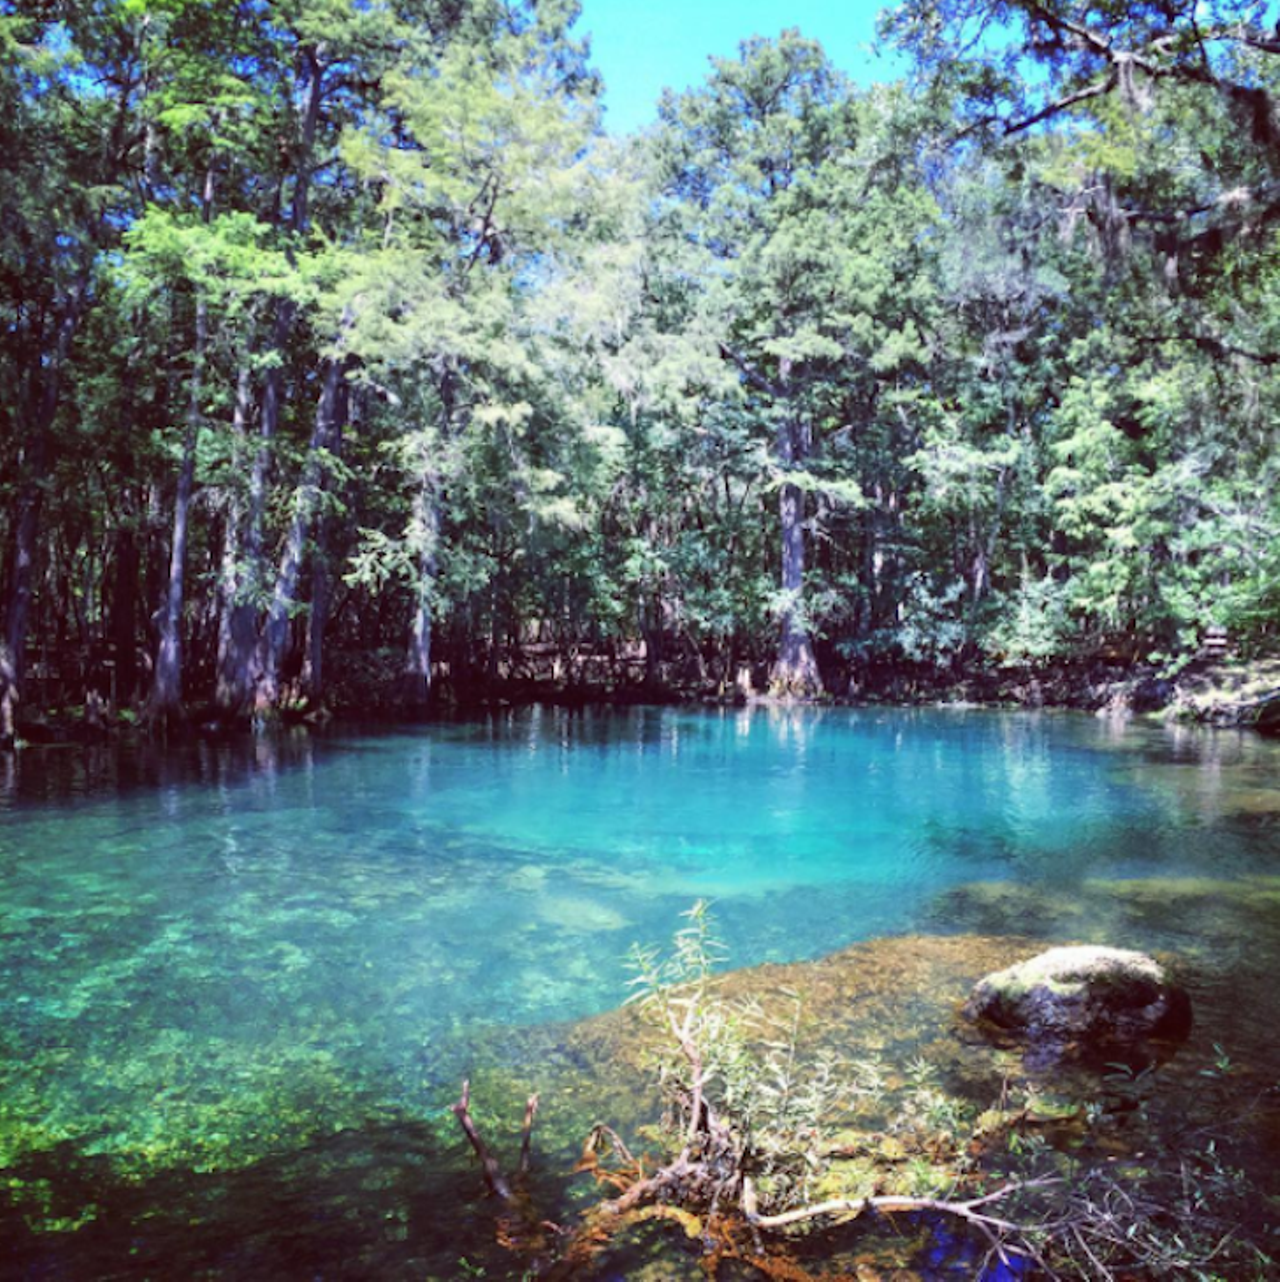 Manatee Springs State Park
Distance from Orlando: 2 hours 18 minutes
This spring is a haven for manatees, so if you don't see one, that would be a first here. This state park boasts 86 campsites in three loops, each with its own hot shower restroom.
Photo via sarah-kilbourne/Instagram